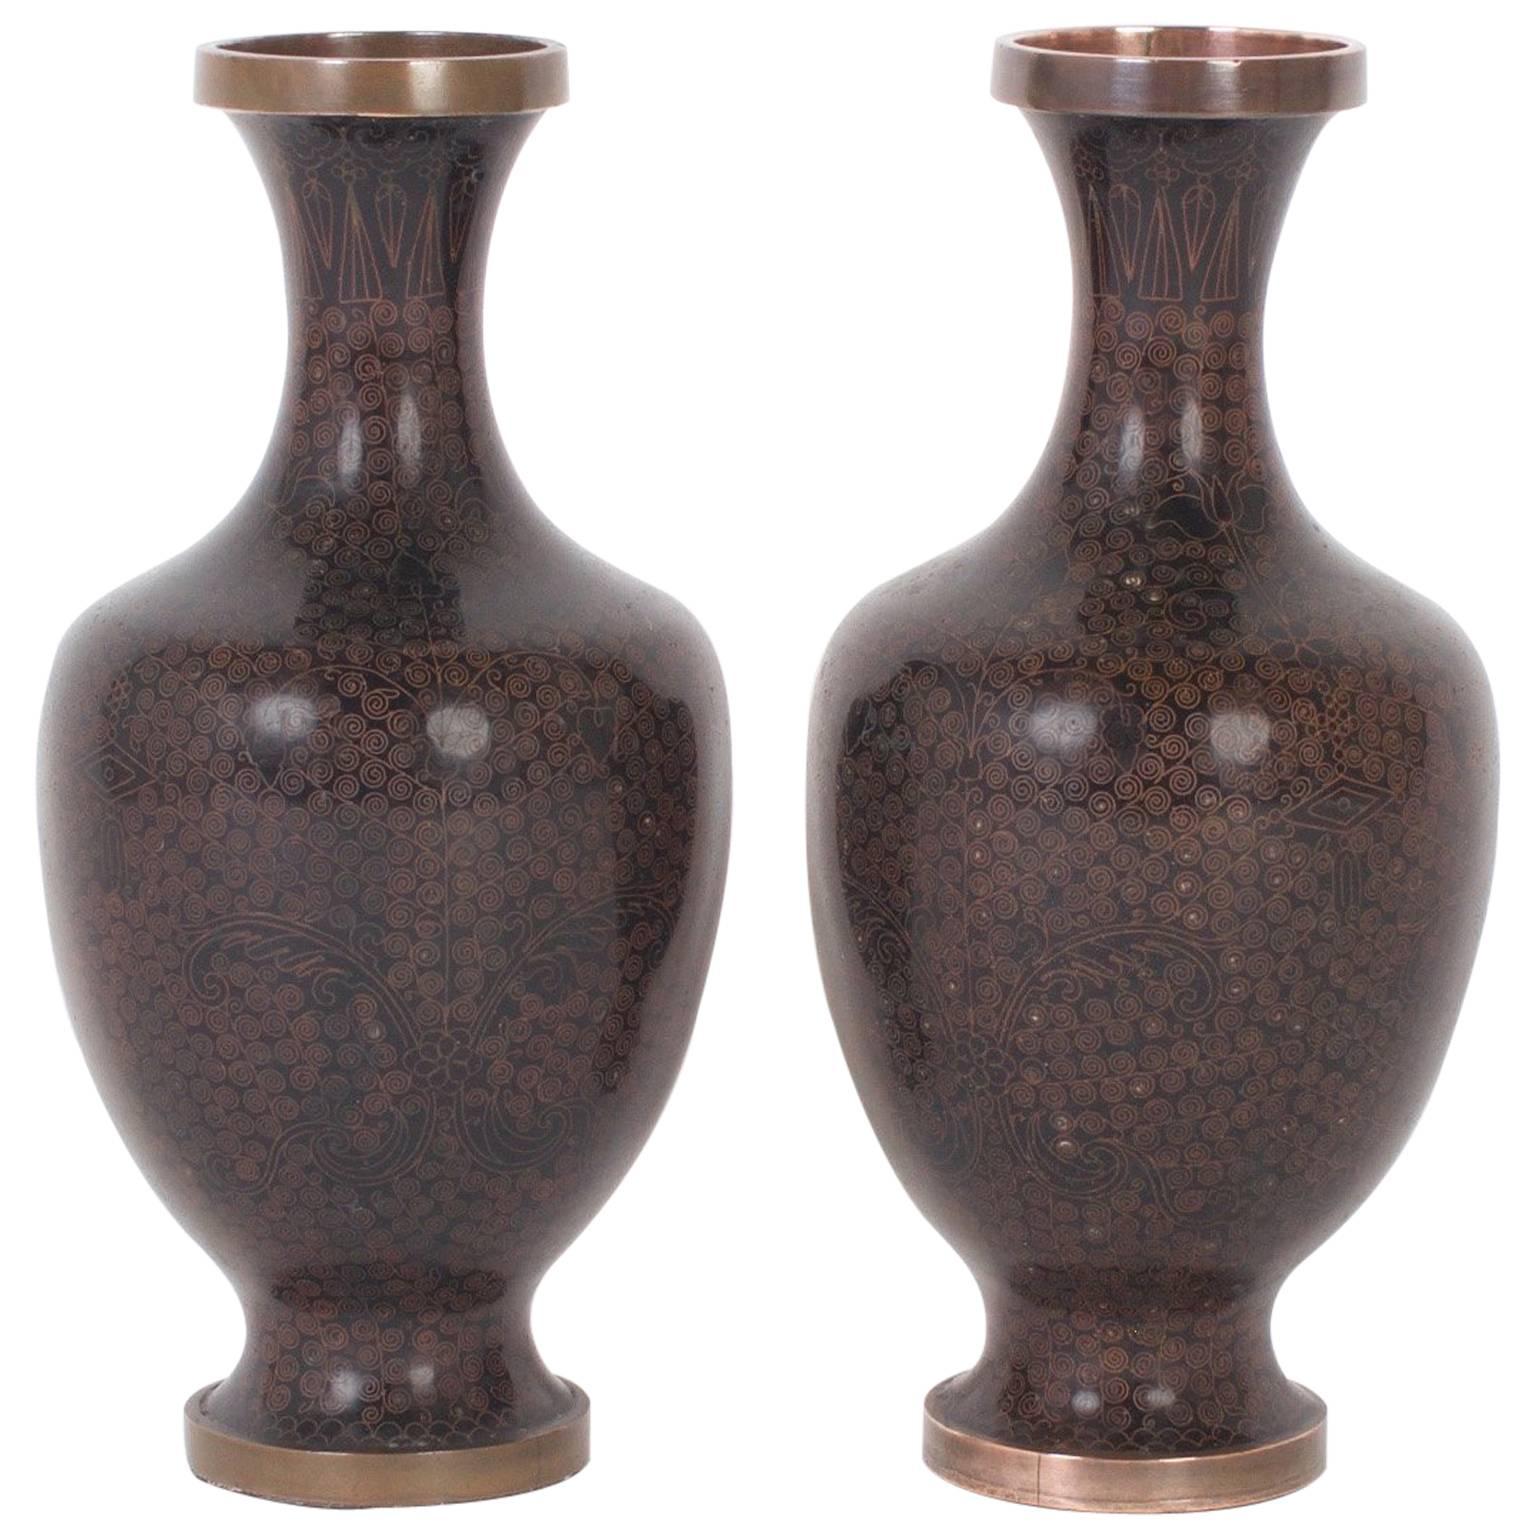 Handsome Pair of Vintage Chinese Cloisonné Vases